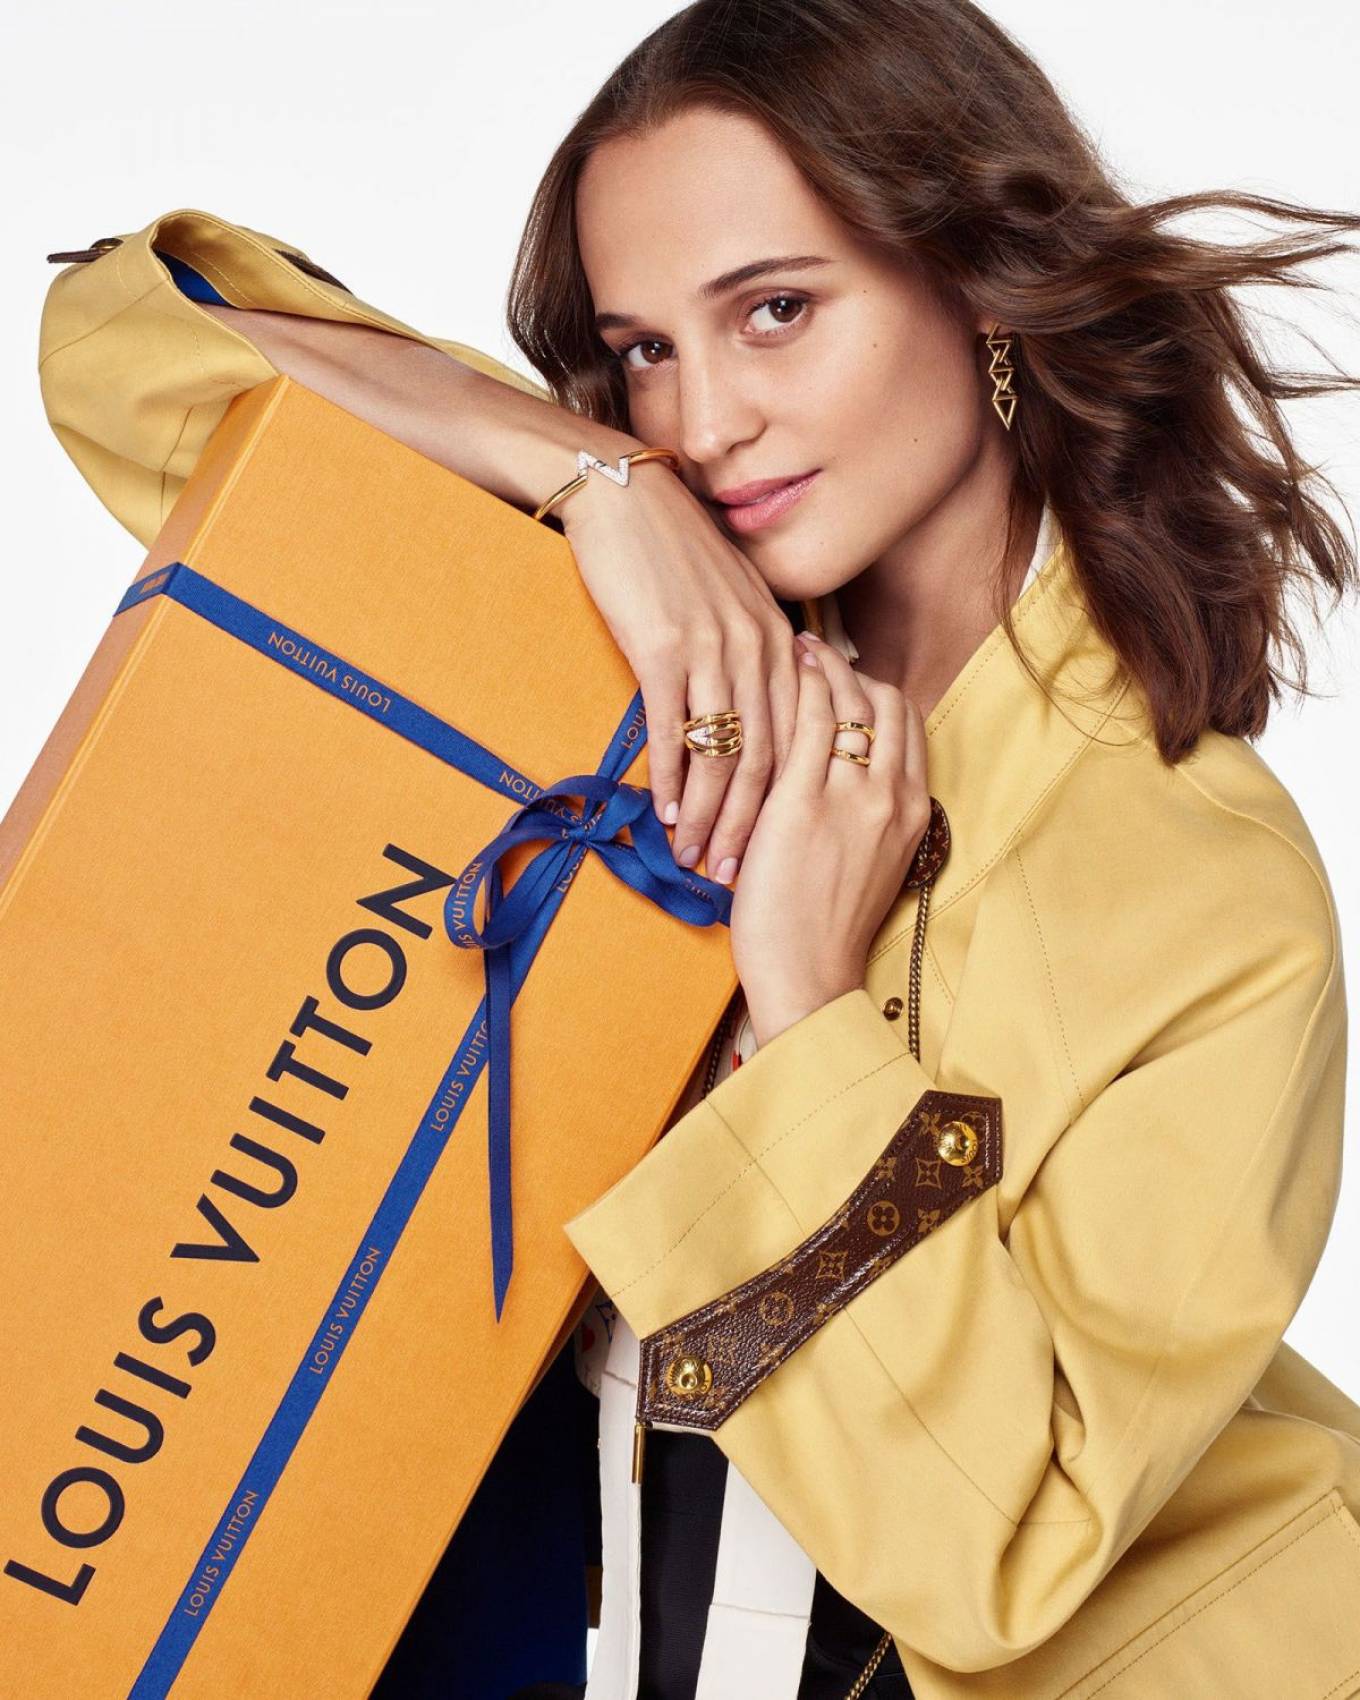 Alicia Vikander – Louis Vuitton Journey Home for the Holidays (2020 Collection)